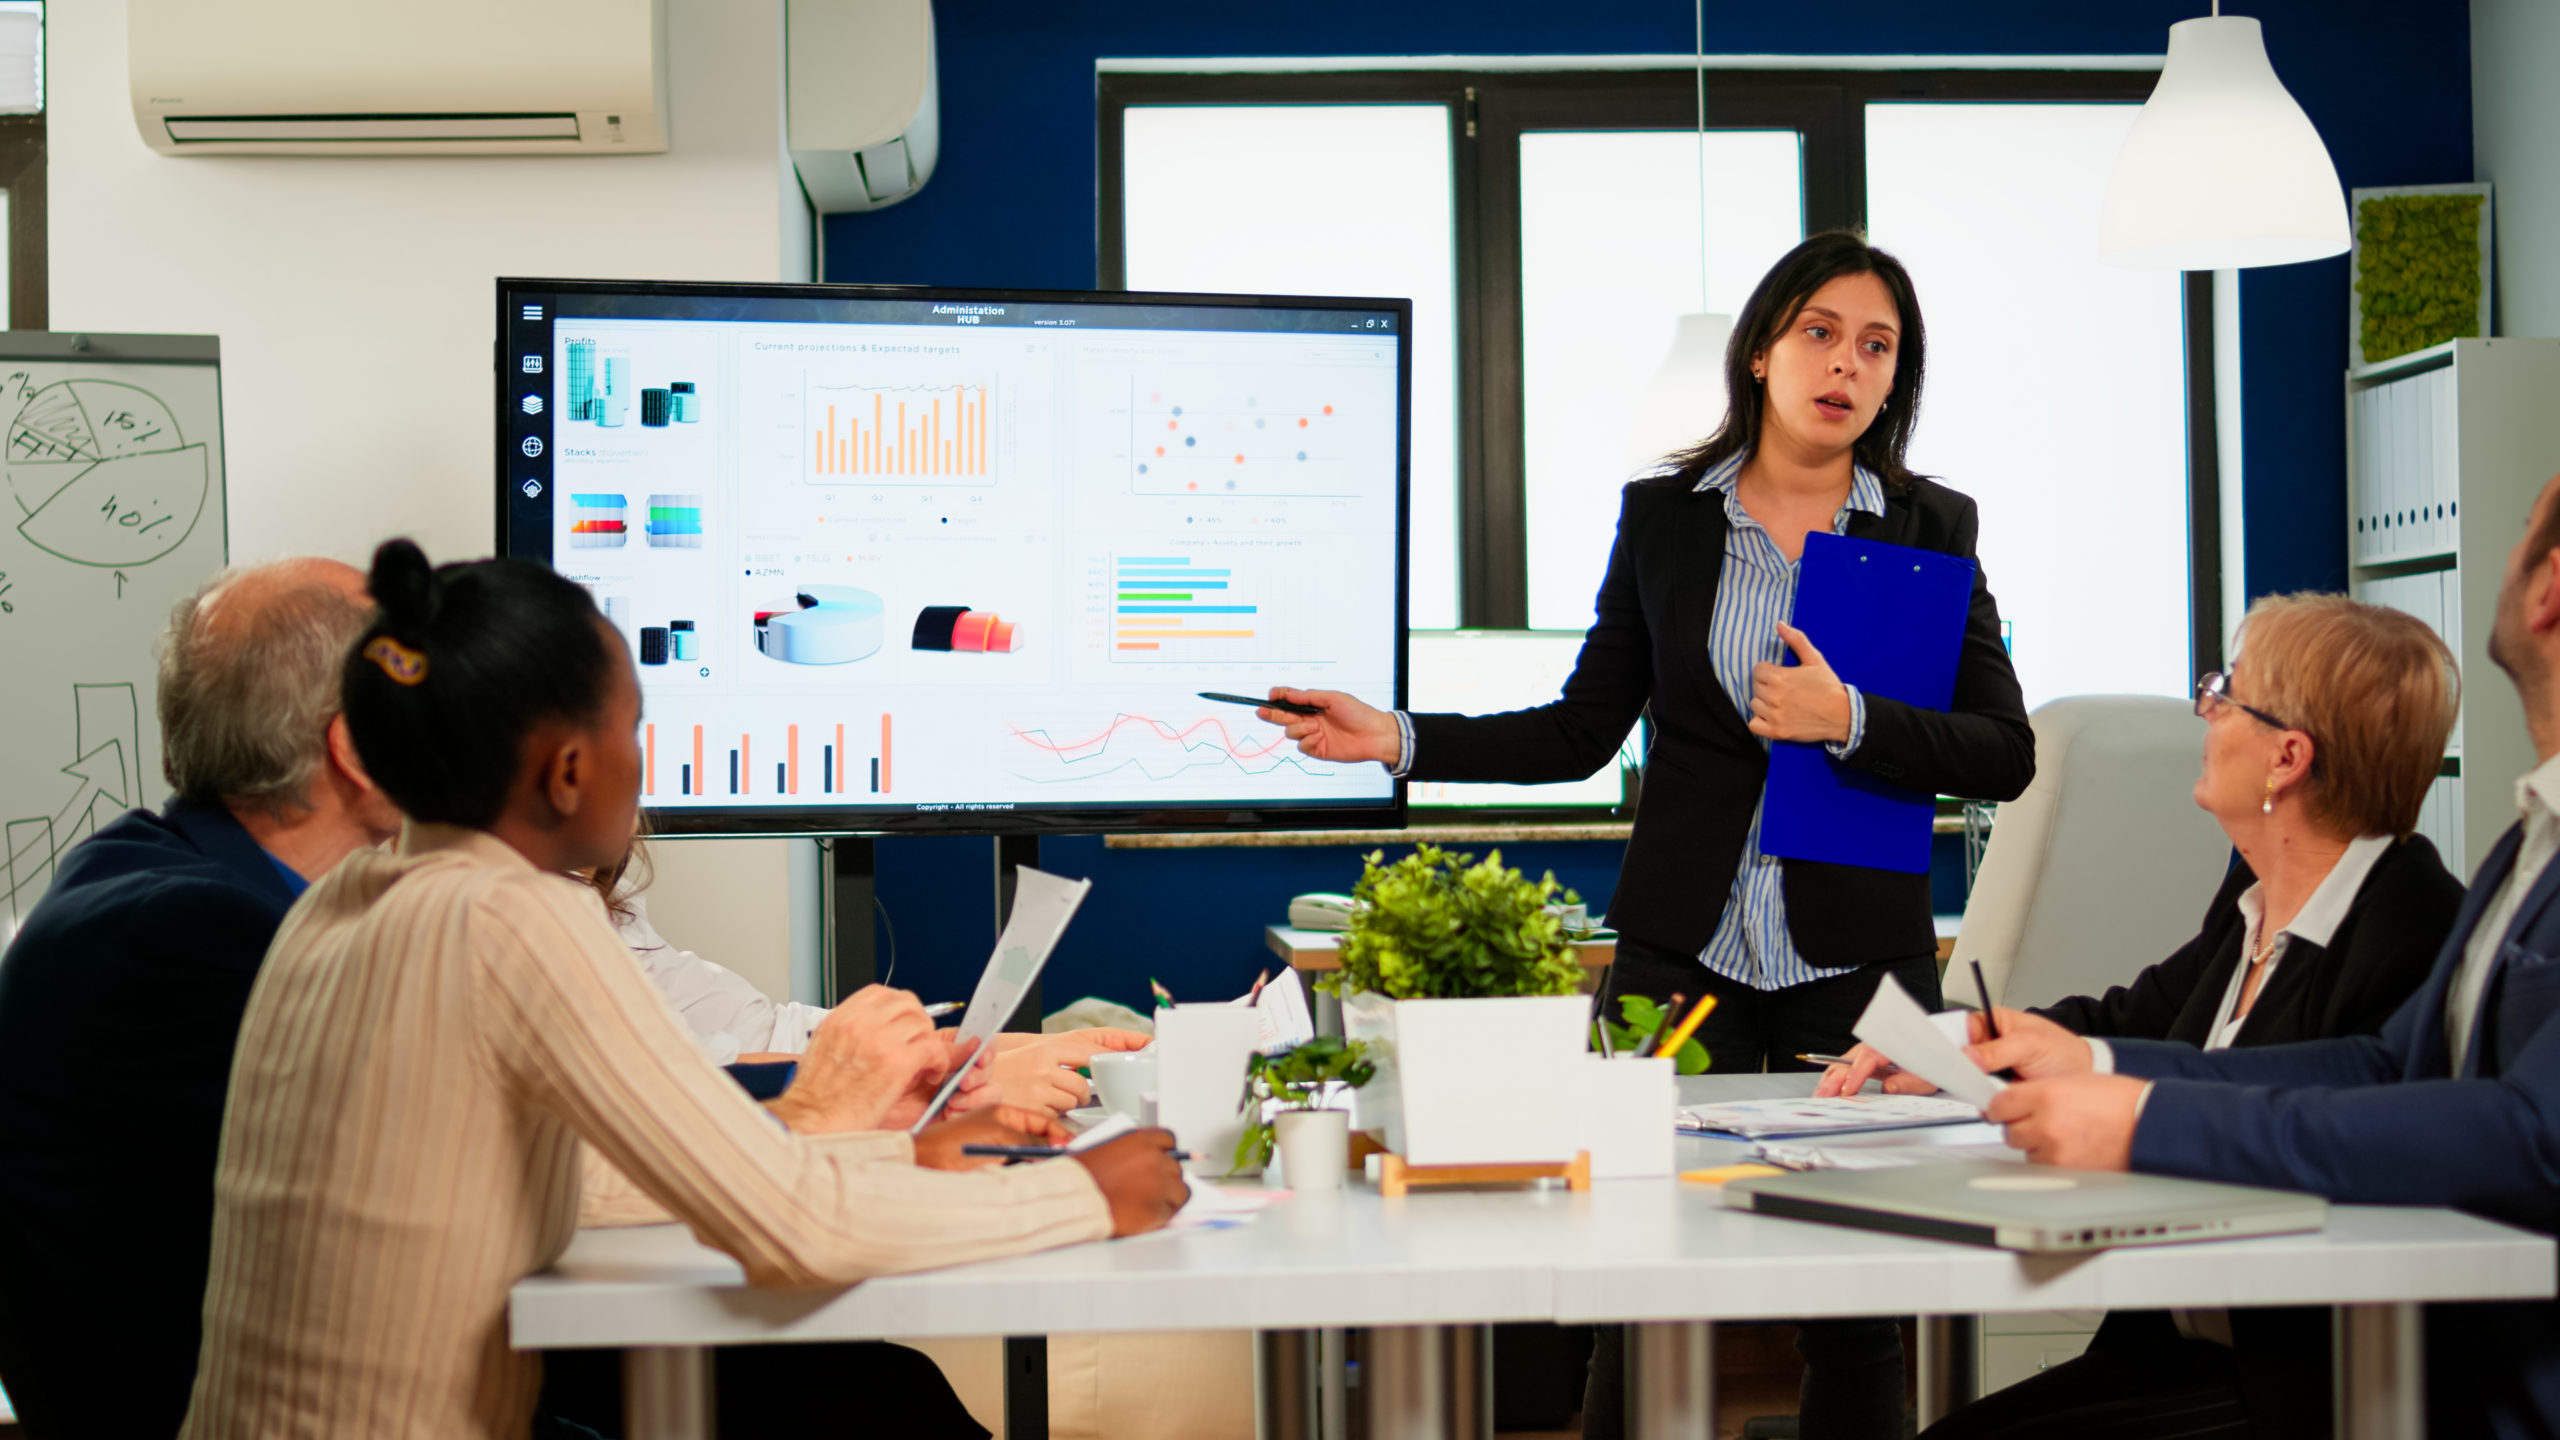 Female project manager holding financial meeting showing statistical graphs and charts on interactive whiteboard touchscreen device. Executive director working in broadroom of creative agency.